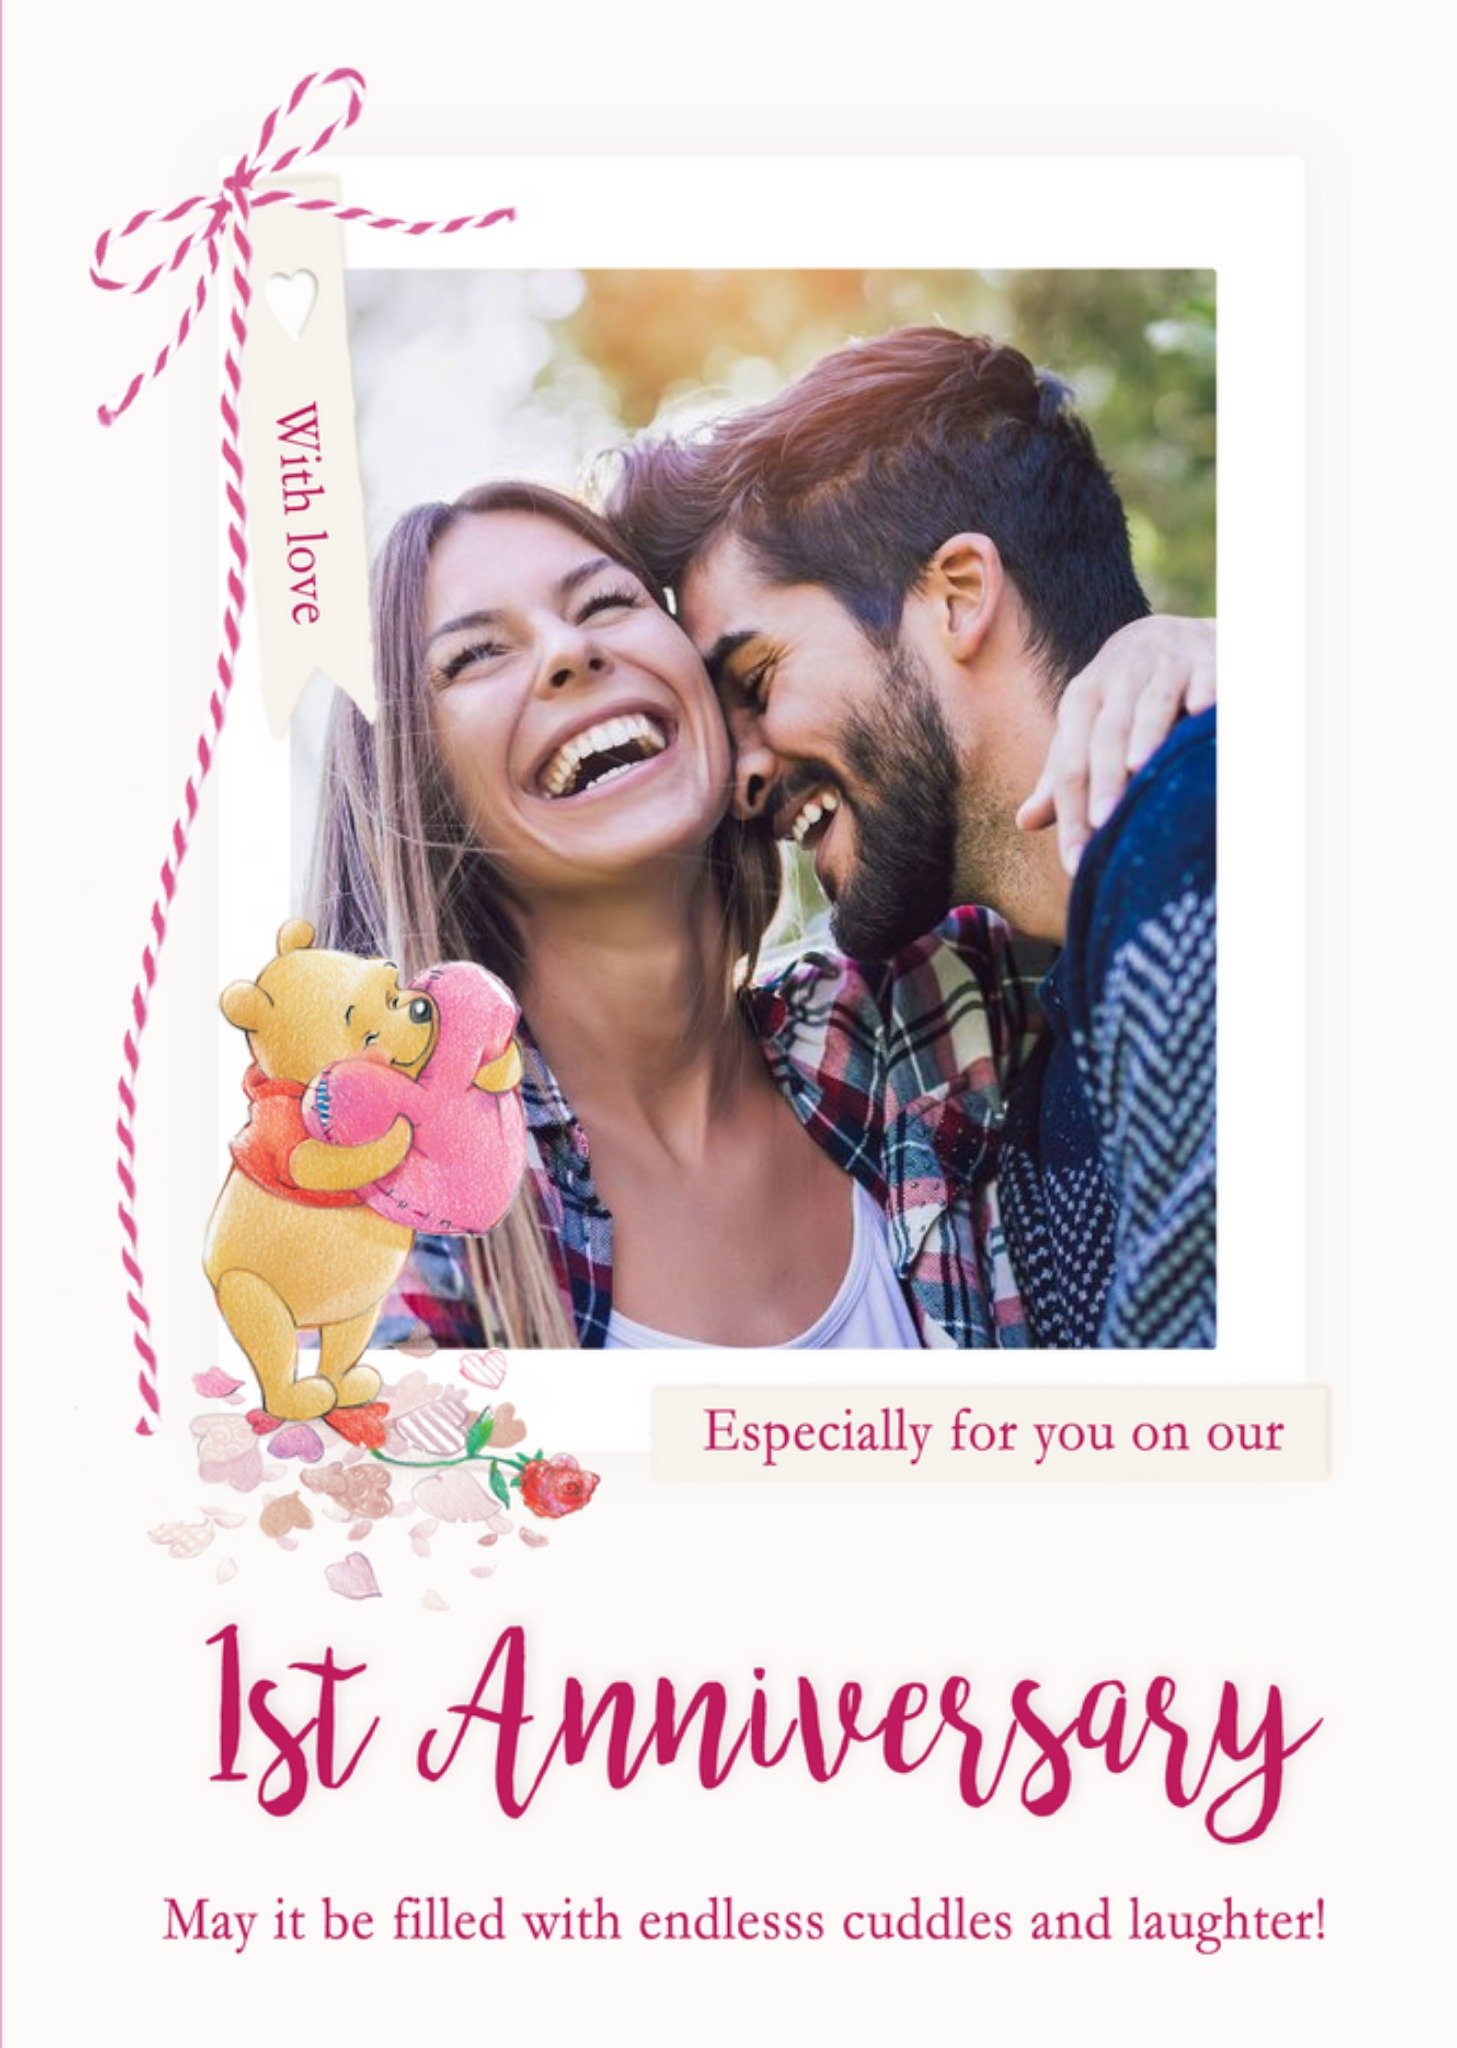 Disney Winnie The Pooh Endless Cuddles And Laughter 1st Anniversary Photo Upload Card, Large